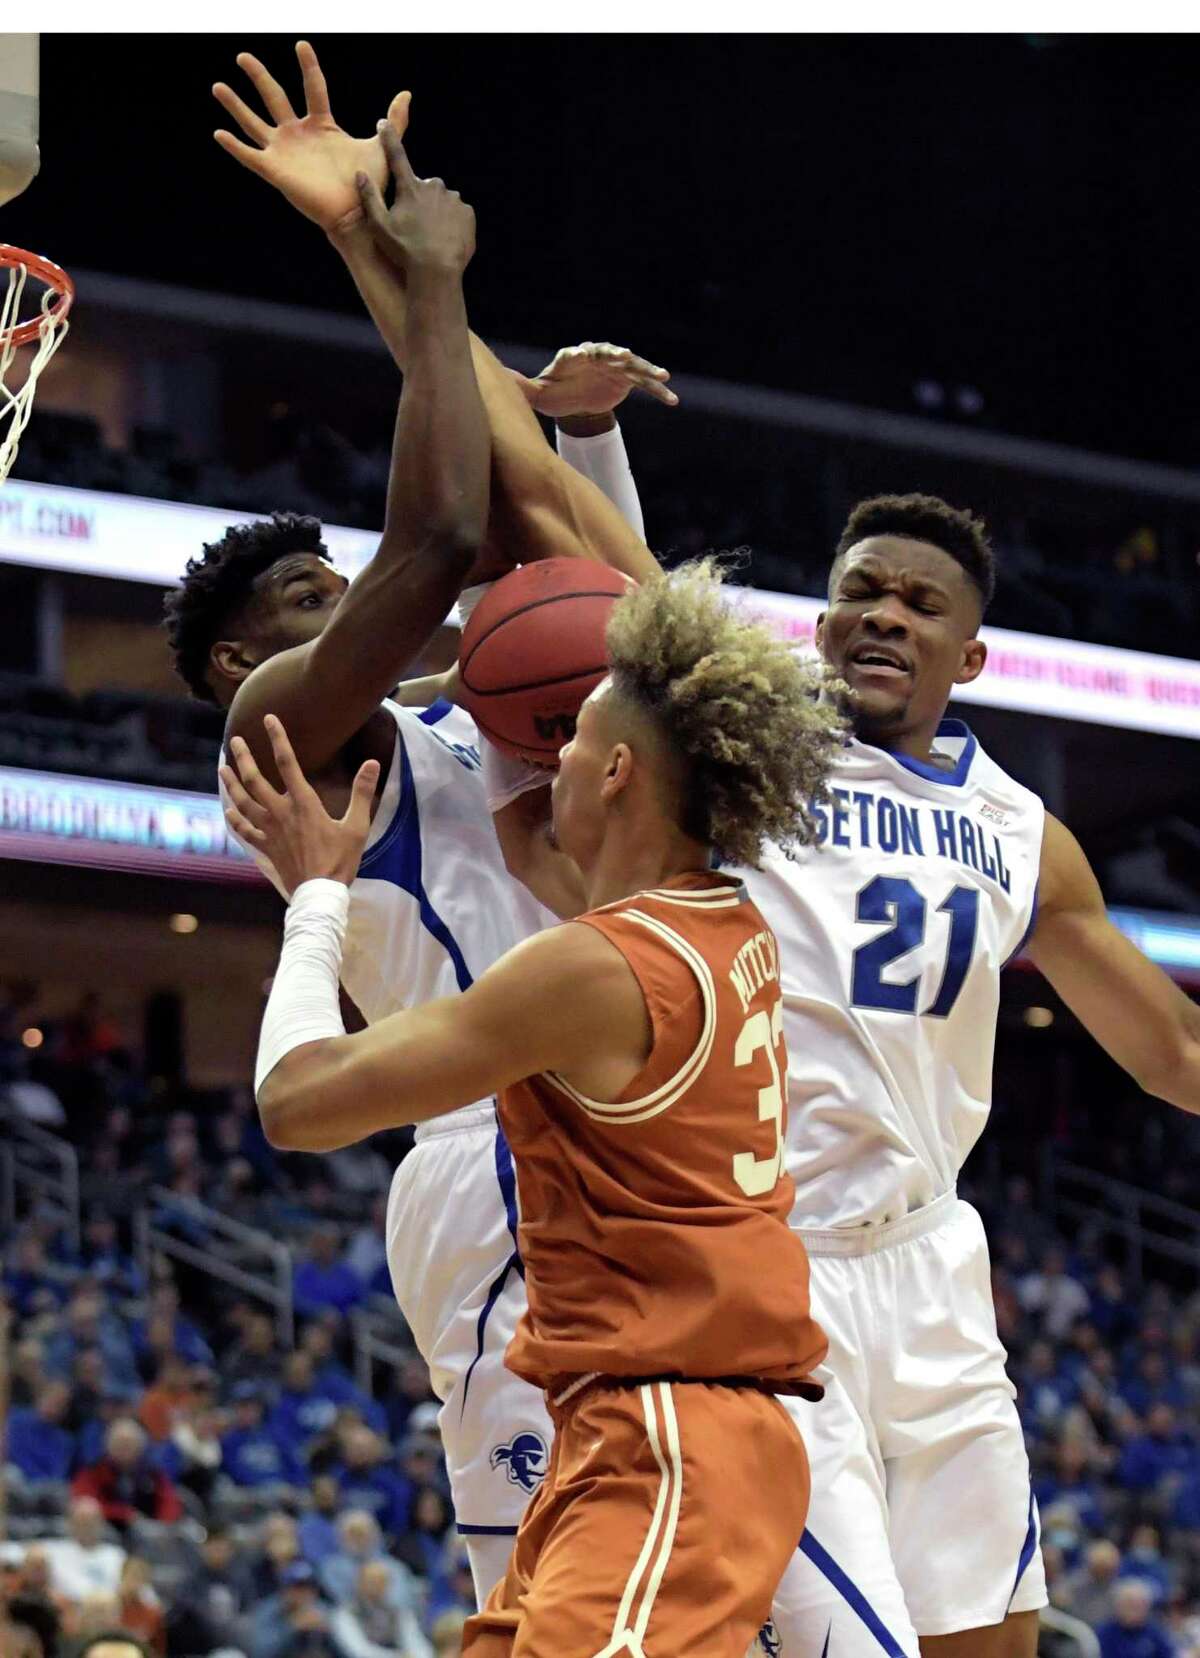 Seton Hall’s frontcourt of Tyrese Samuel, left, and Ike Obiagu proved to be too much for Tre Mitchell and Texas on Thursday in Newark, N.J.